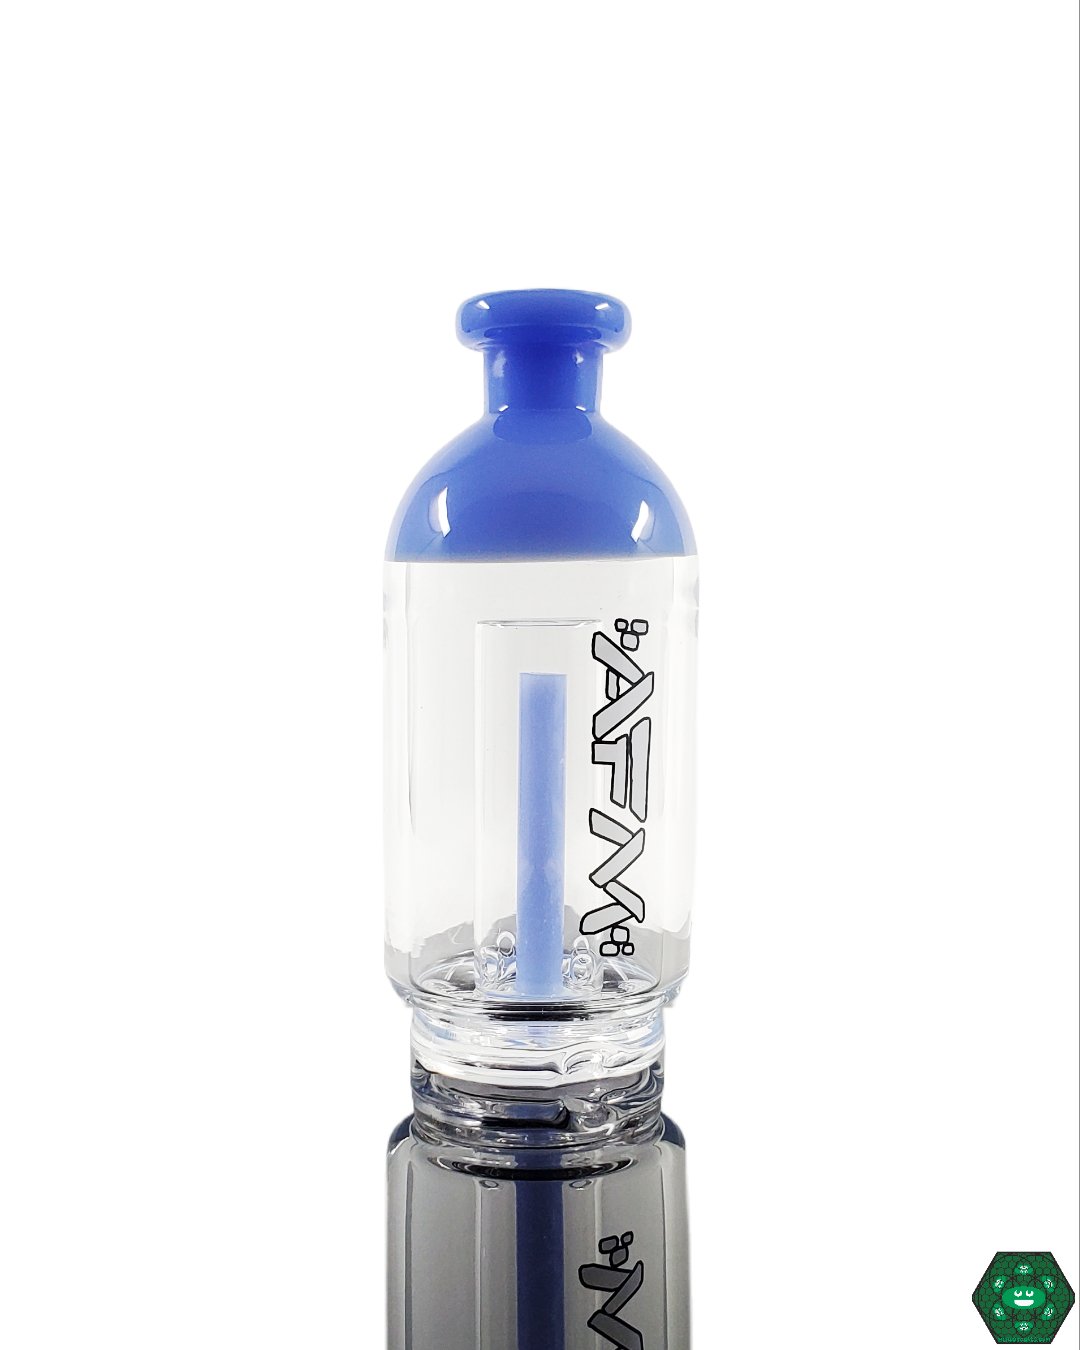 AFM Glass - Colored Puffco Attachments - @Afm_glass - HG